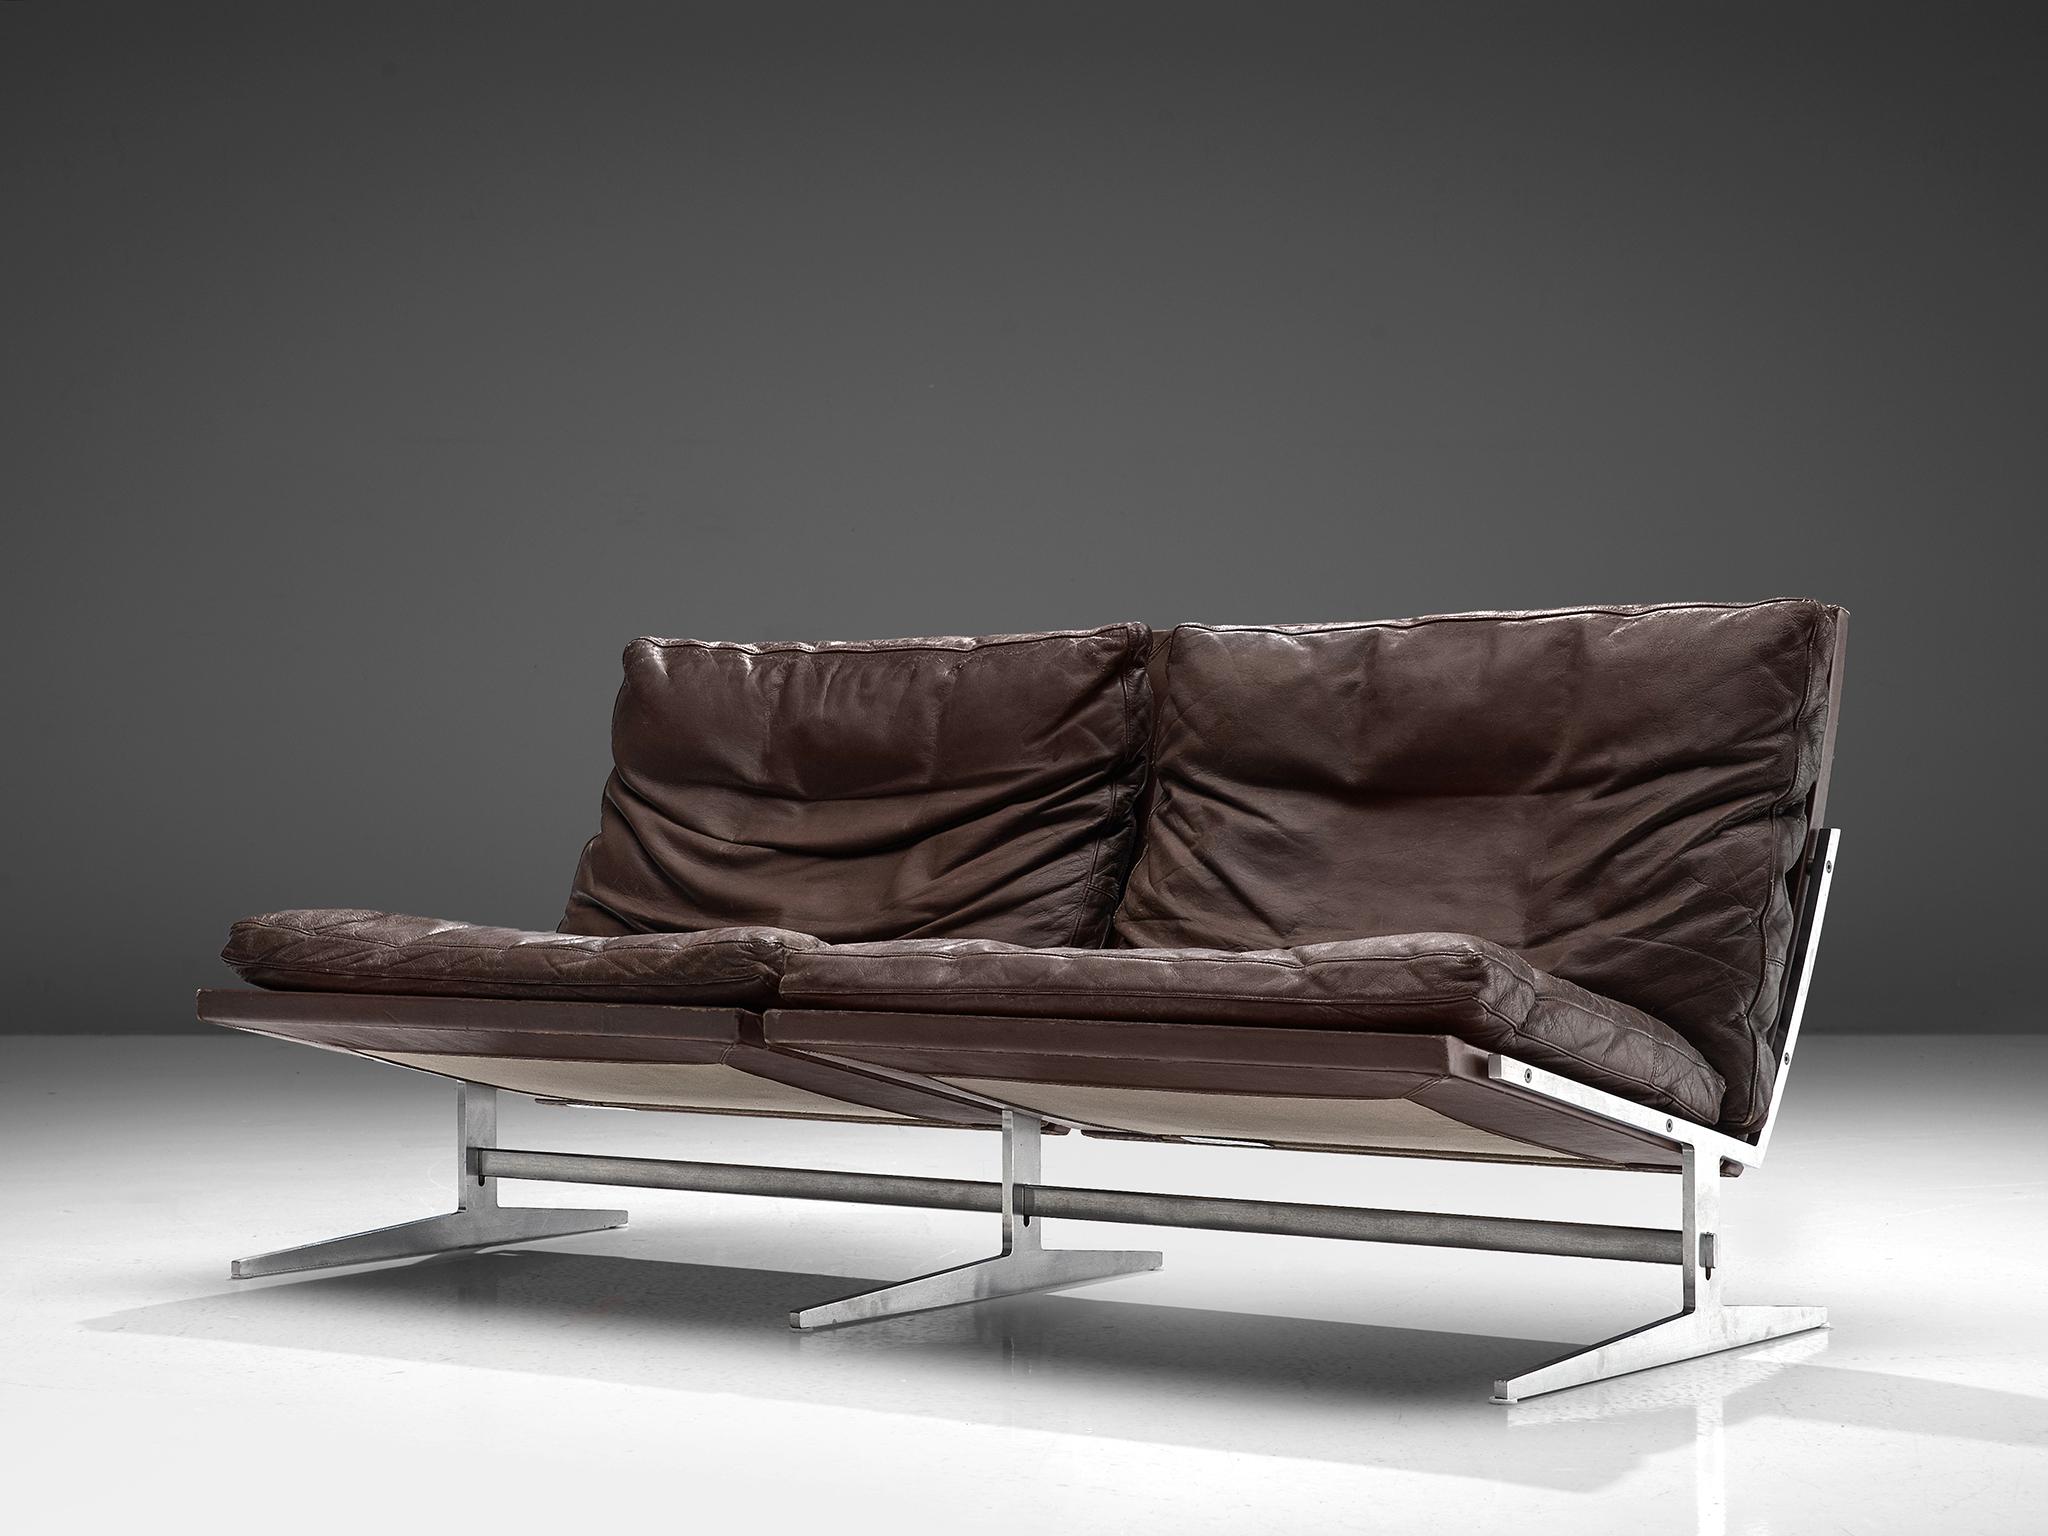 Preben Fabricius & Jørgen Kastholm for Bo-Ex, sofa model BO561, brushed steel and brown leather, Denmark, 1962. 

This modern slipper sofa is executed in steel and leather, holding an L-shaped seating. This shape is repeated in the legs. Besides